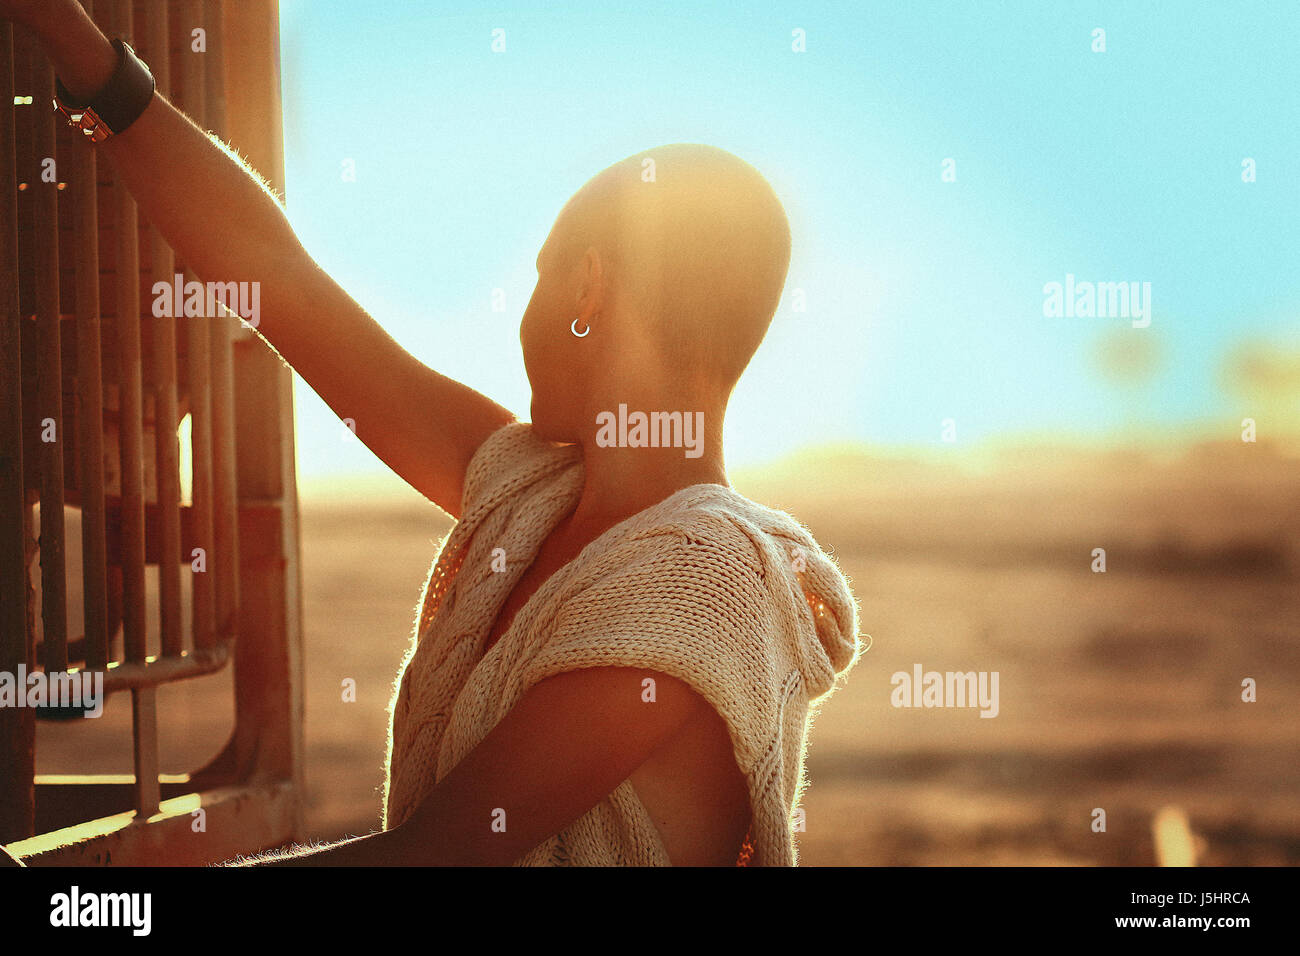 Shaved-headed girl silhouette on the sunset scenery, desert view with blue sky and sands,old vintage trains and railway station backdrop, fasion style Stock Photo